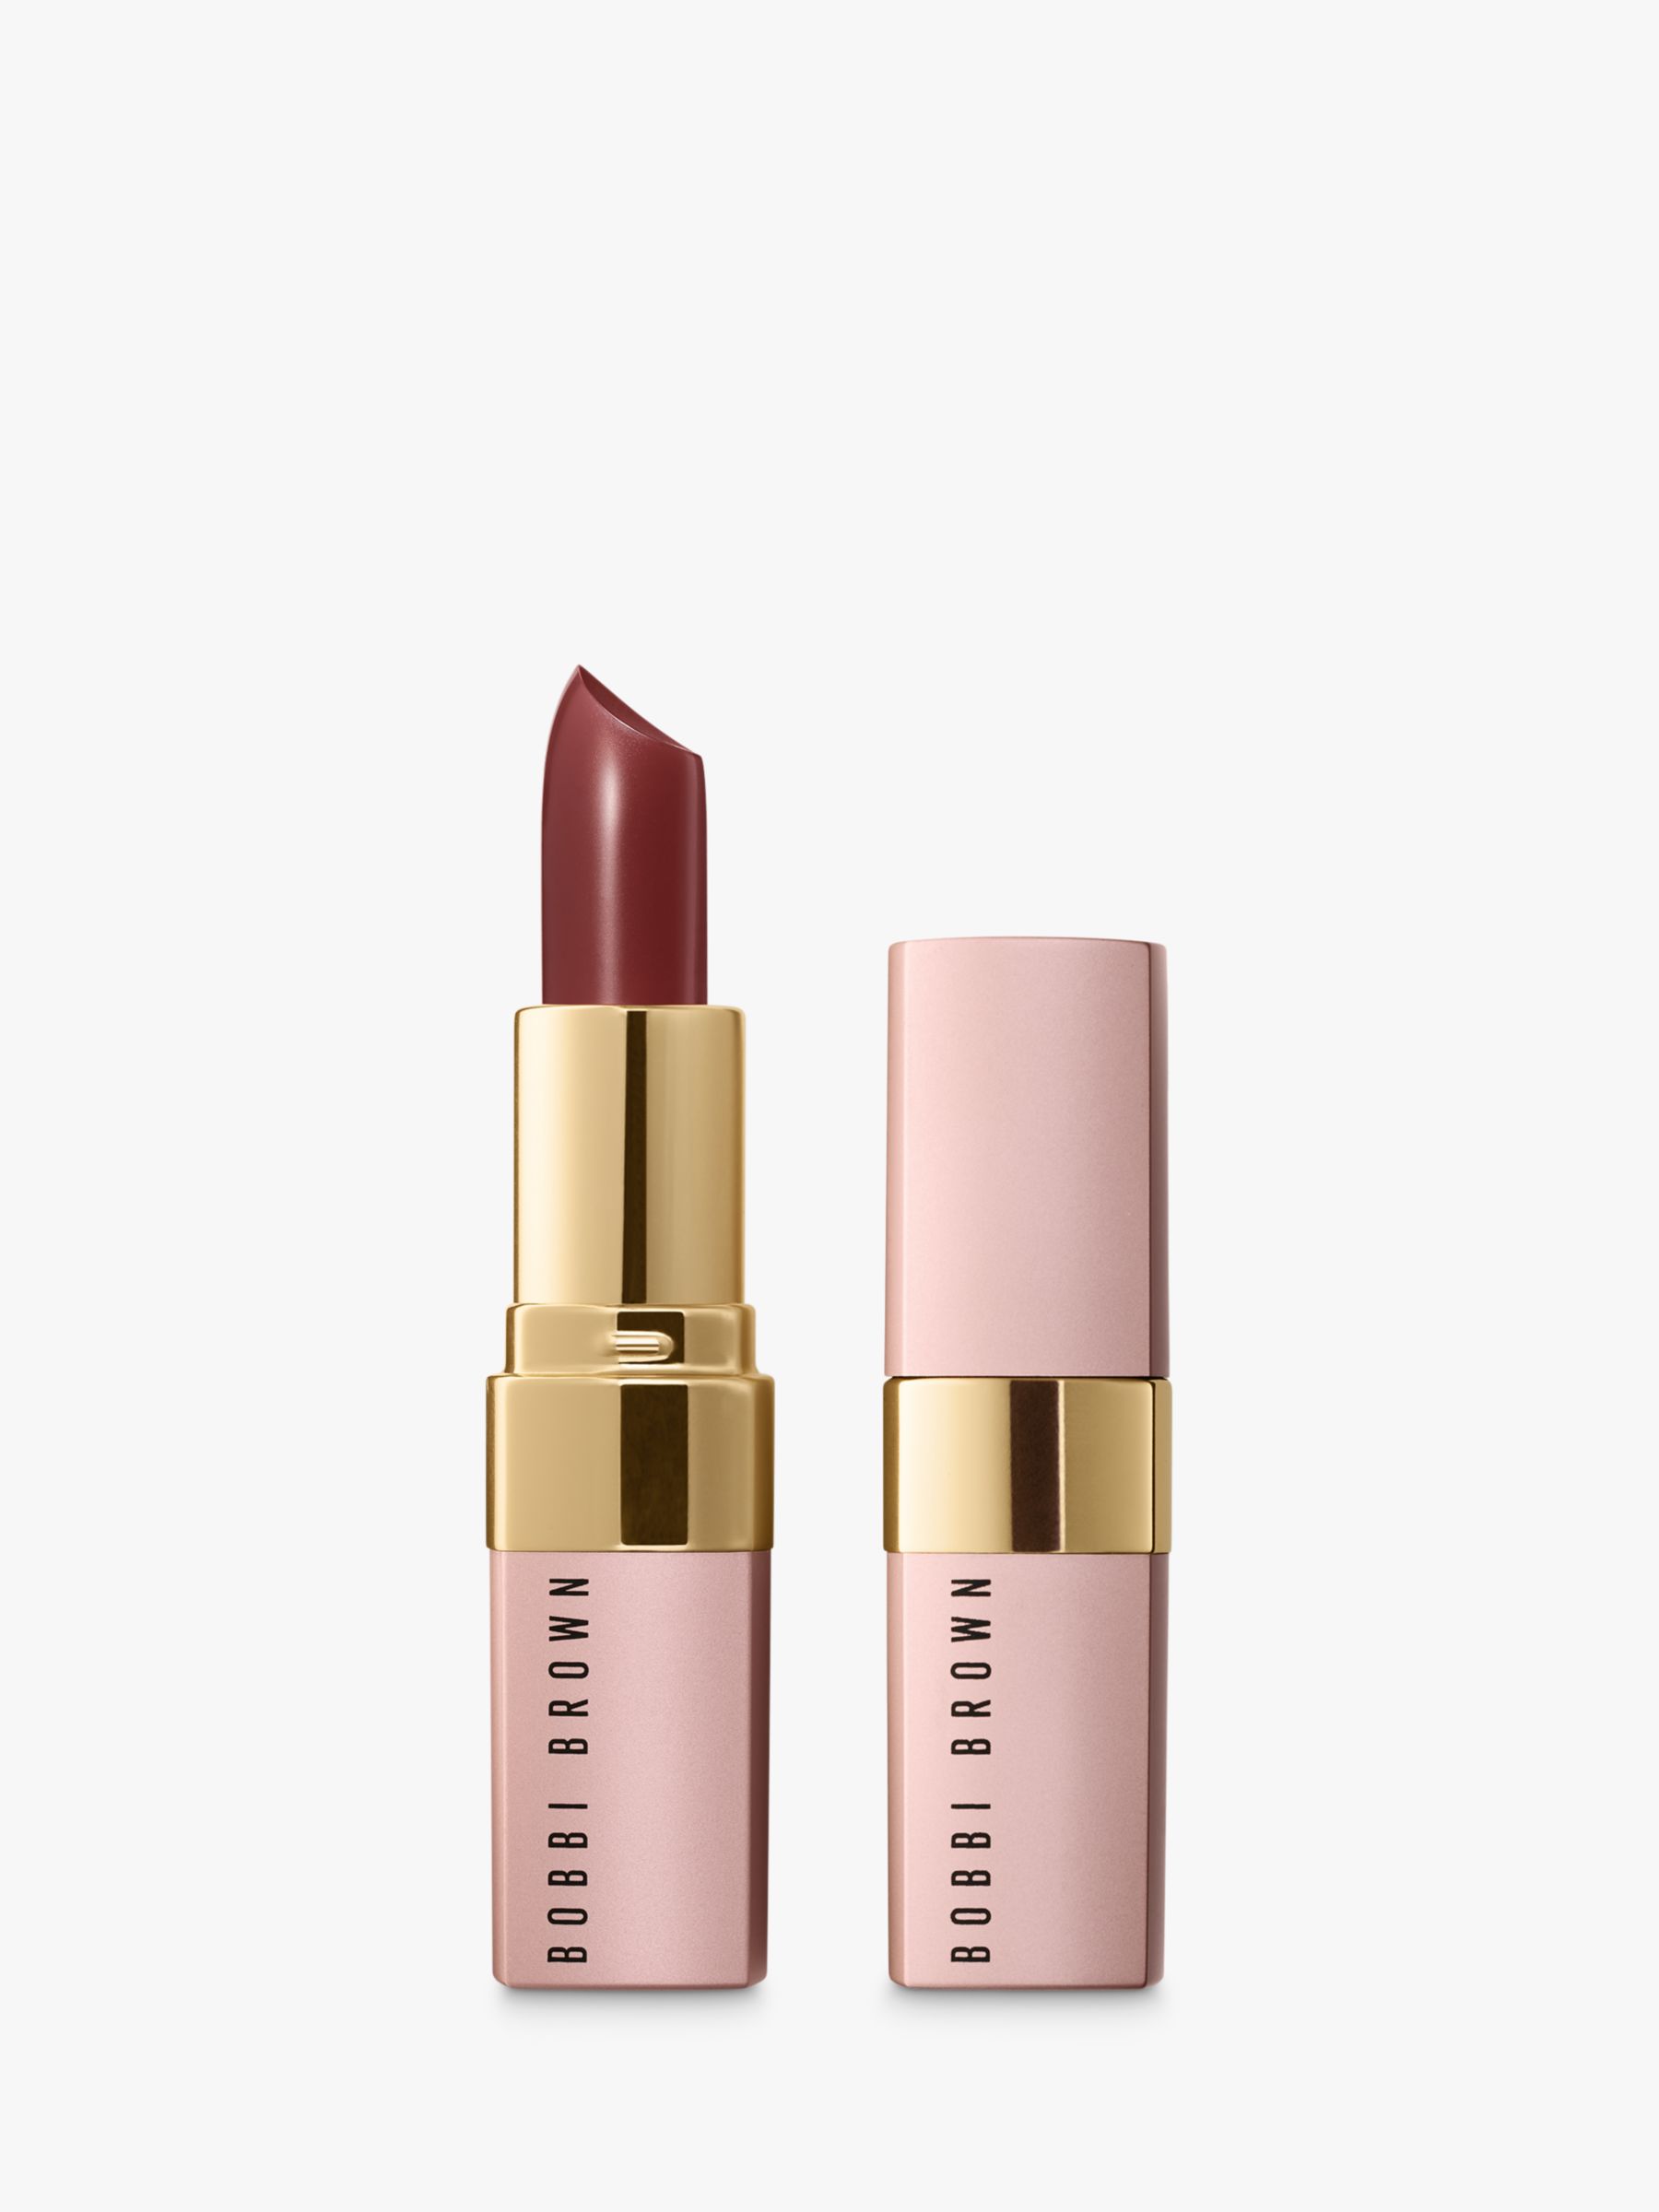 Bobbi Brown Crushed Lipcolour Limited Edition Rose Glow Collection, Cranberry 1